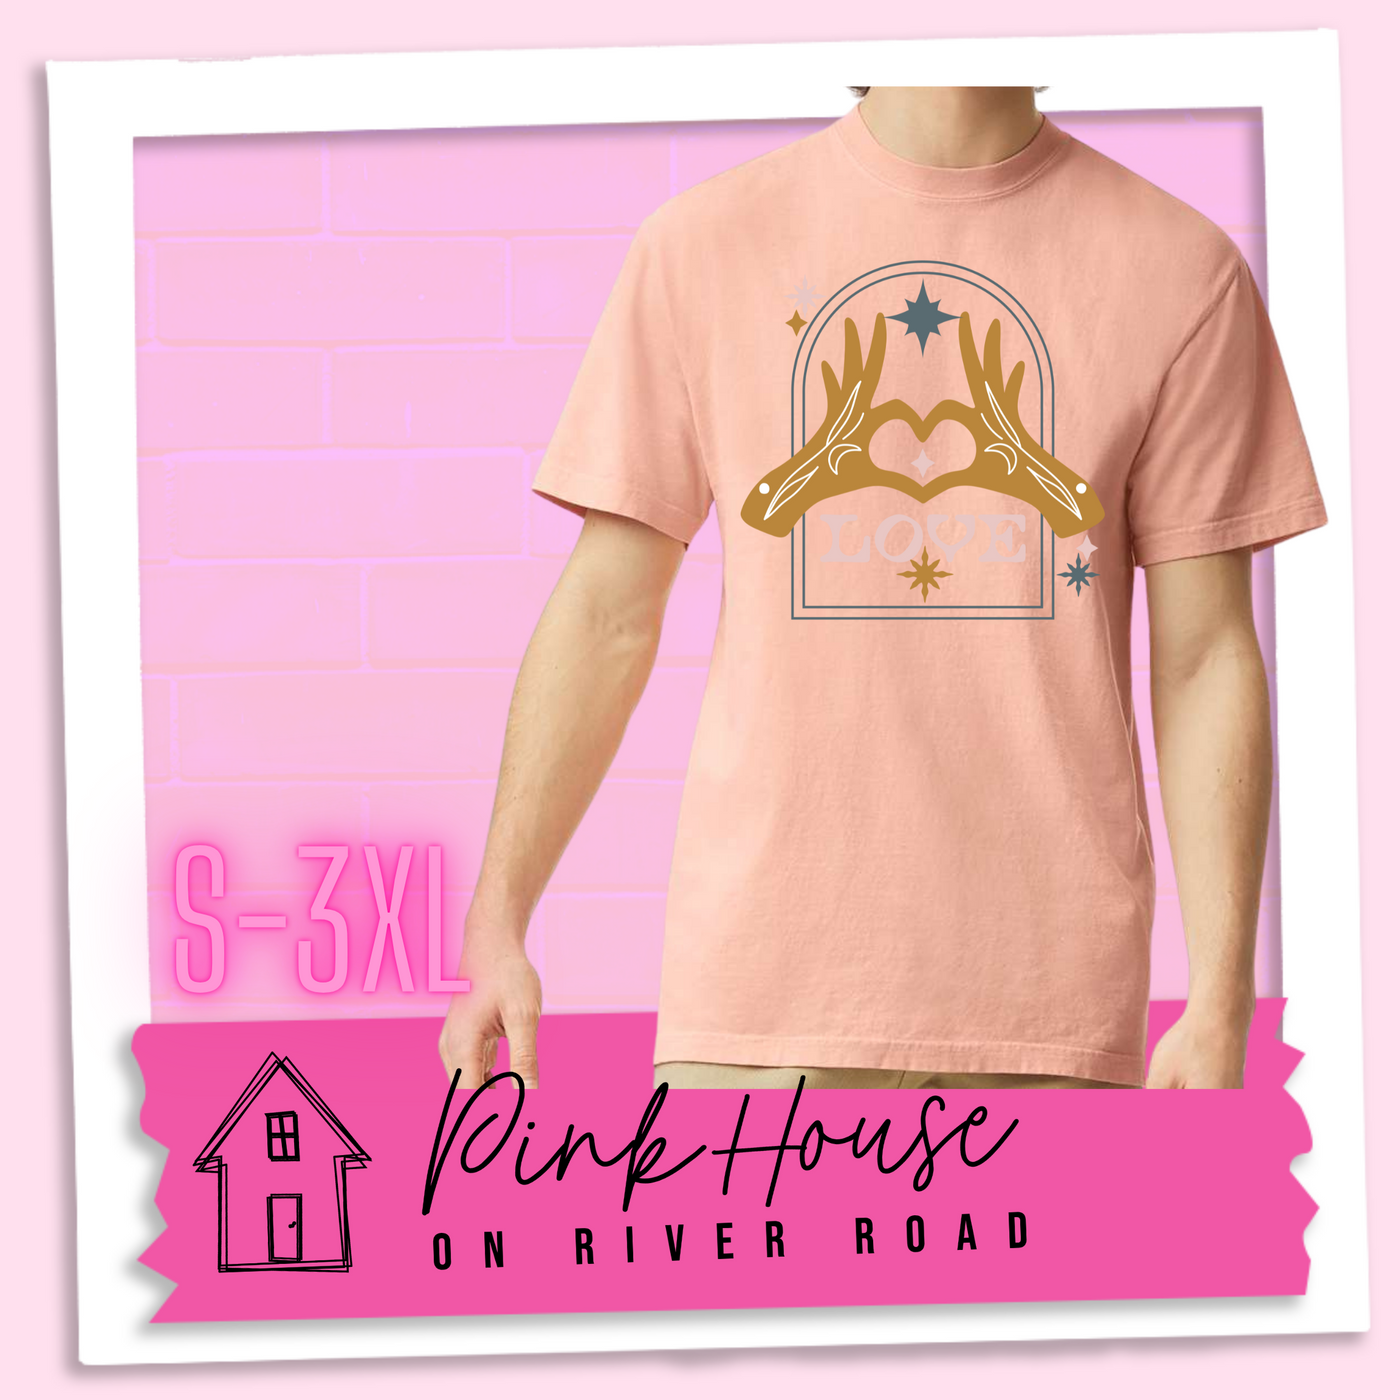 Peach tee with a graphic. Graphic is of two tattooed hands making a heart in front of an archway with stars and the word Love in the archway.